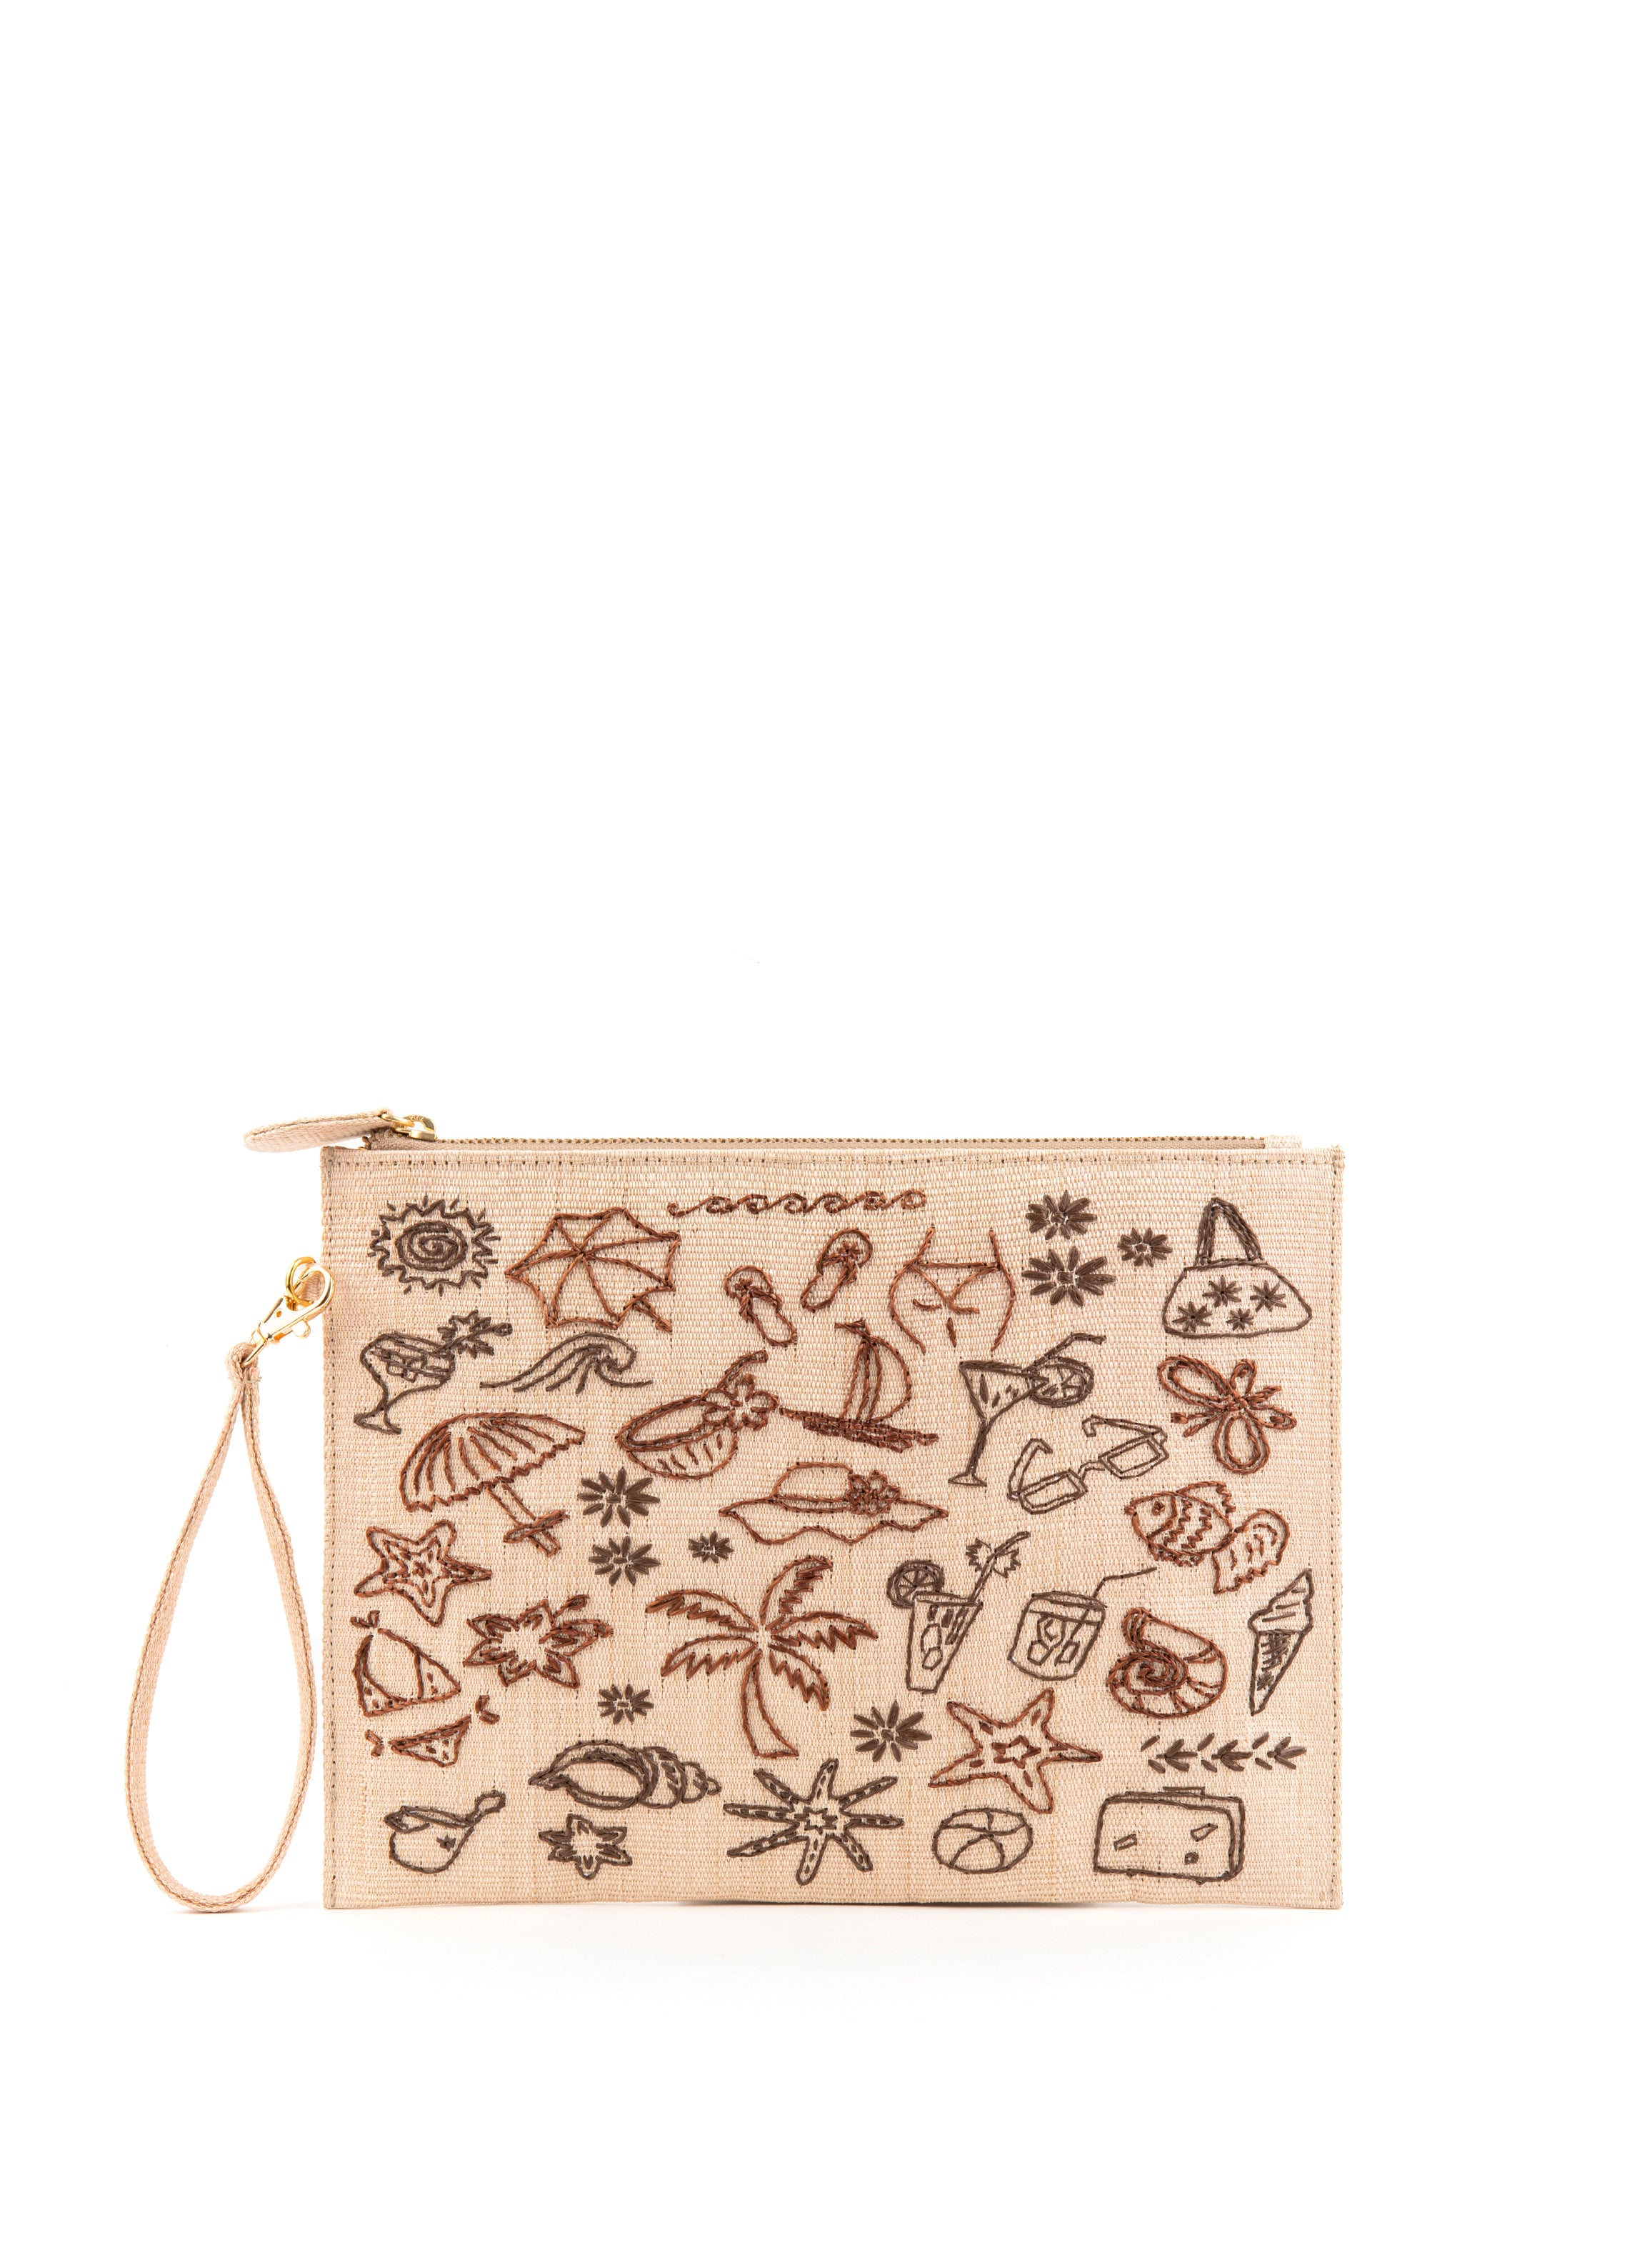 Baguio Beach Pouch by GUSTOKO